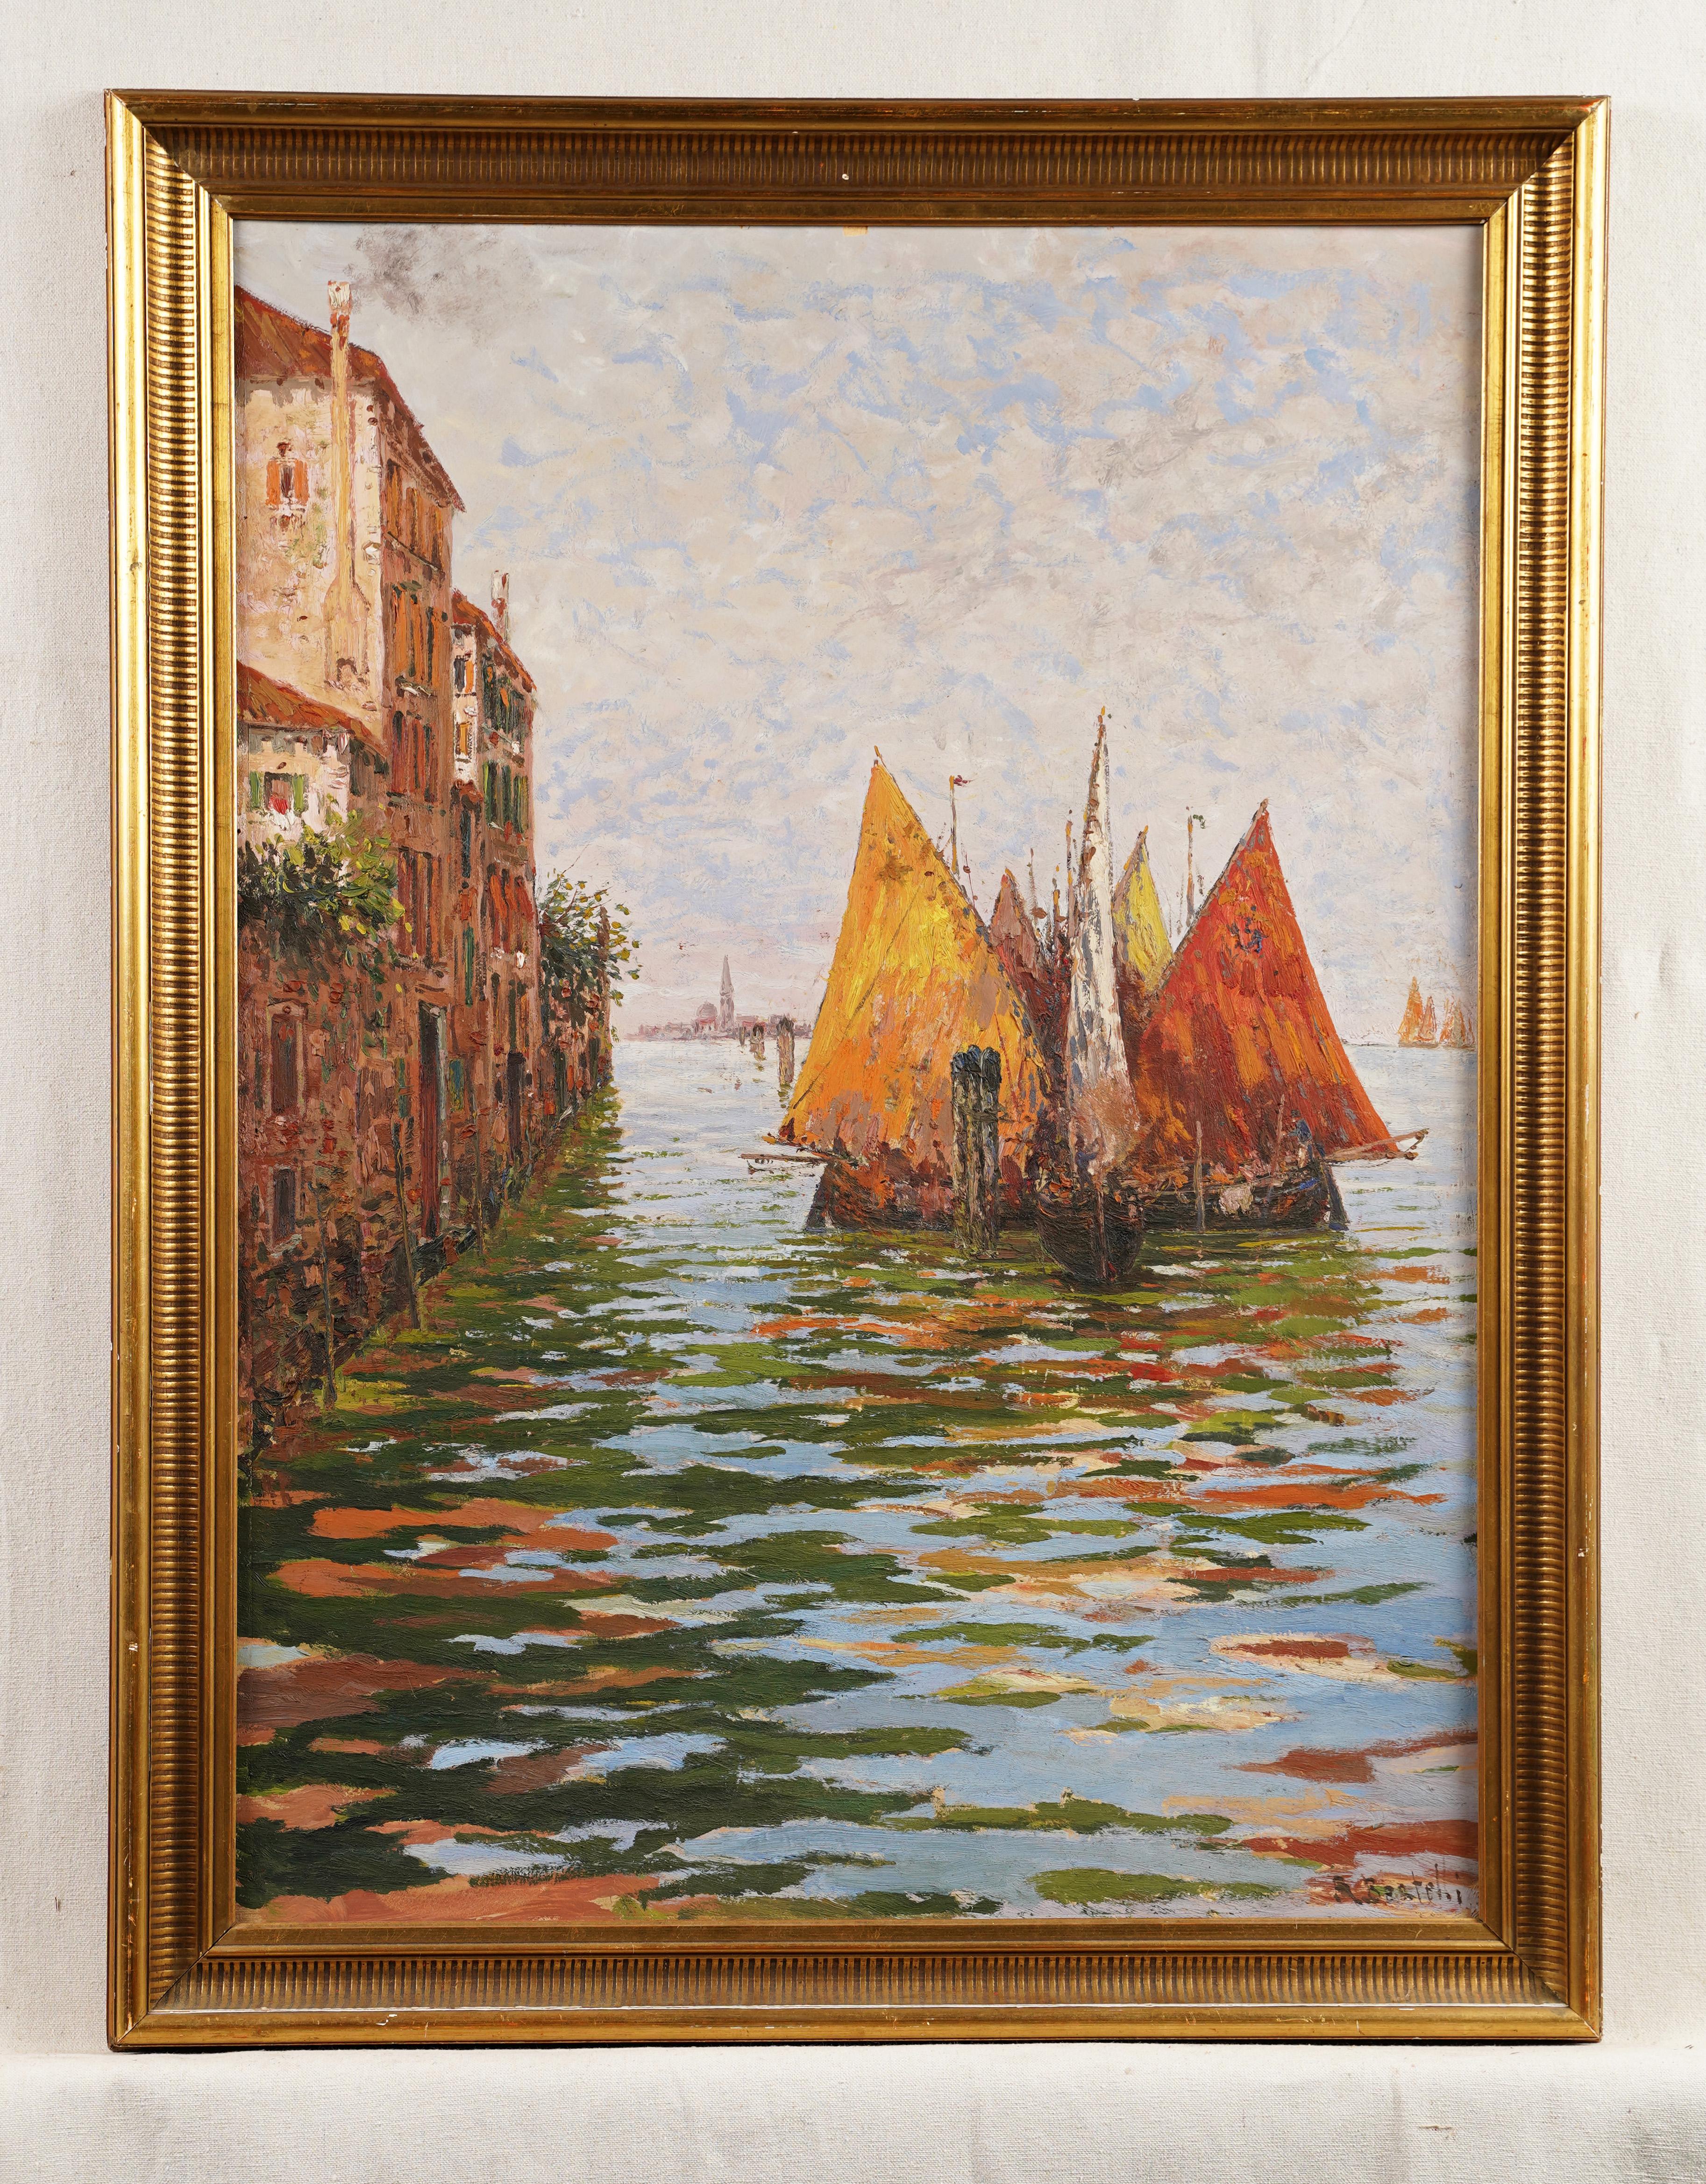 Antique Italian impressionist signed Venice oil painting.  Oil on board.  Signed.  Framed.  